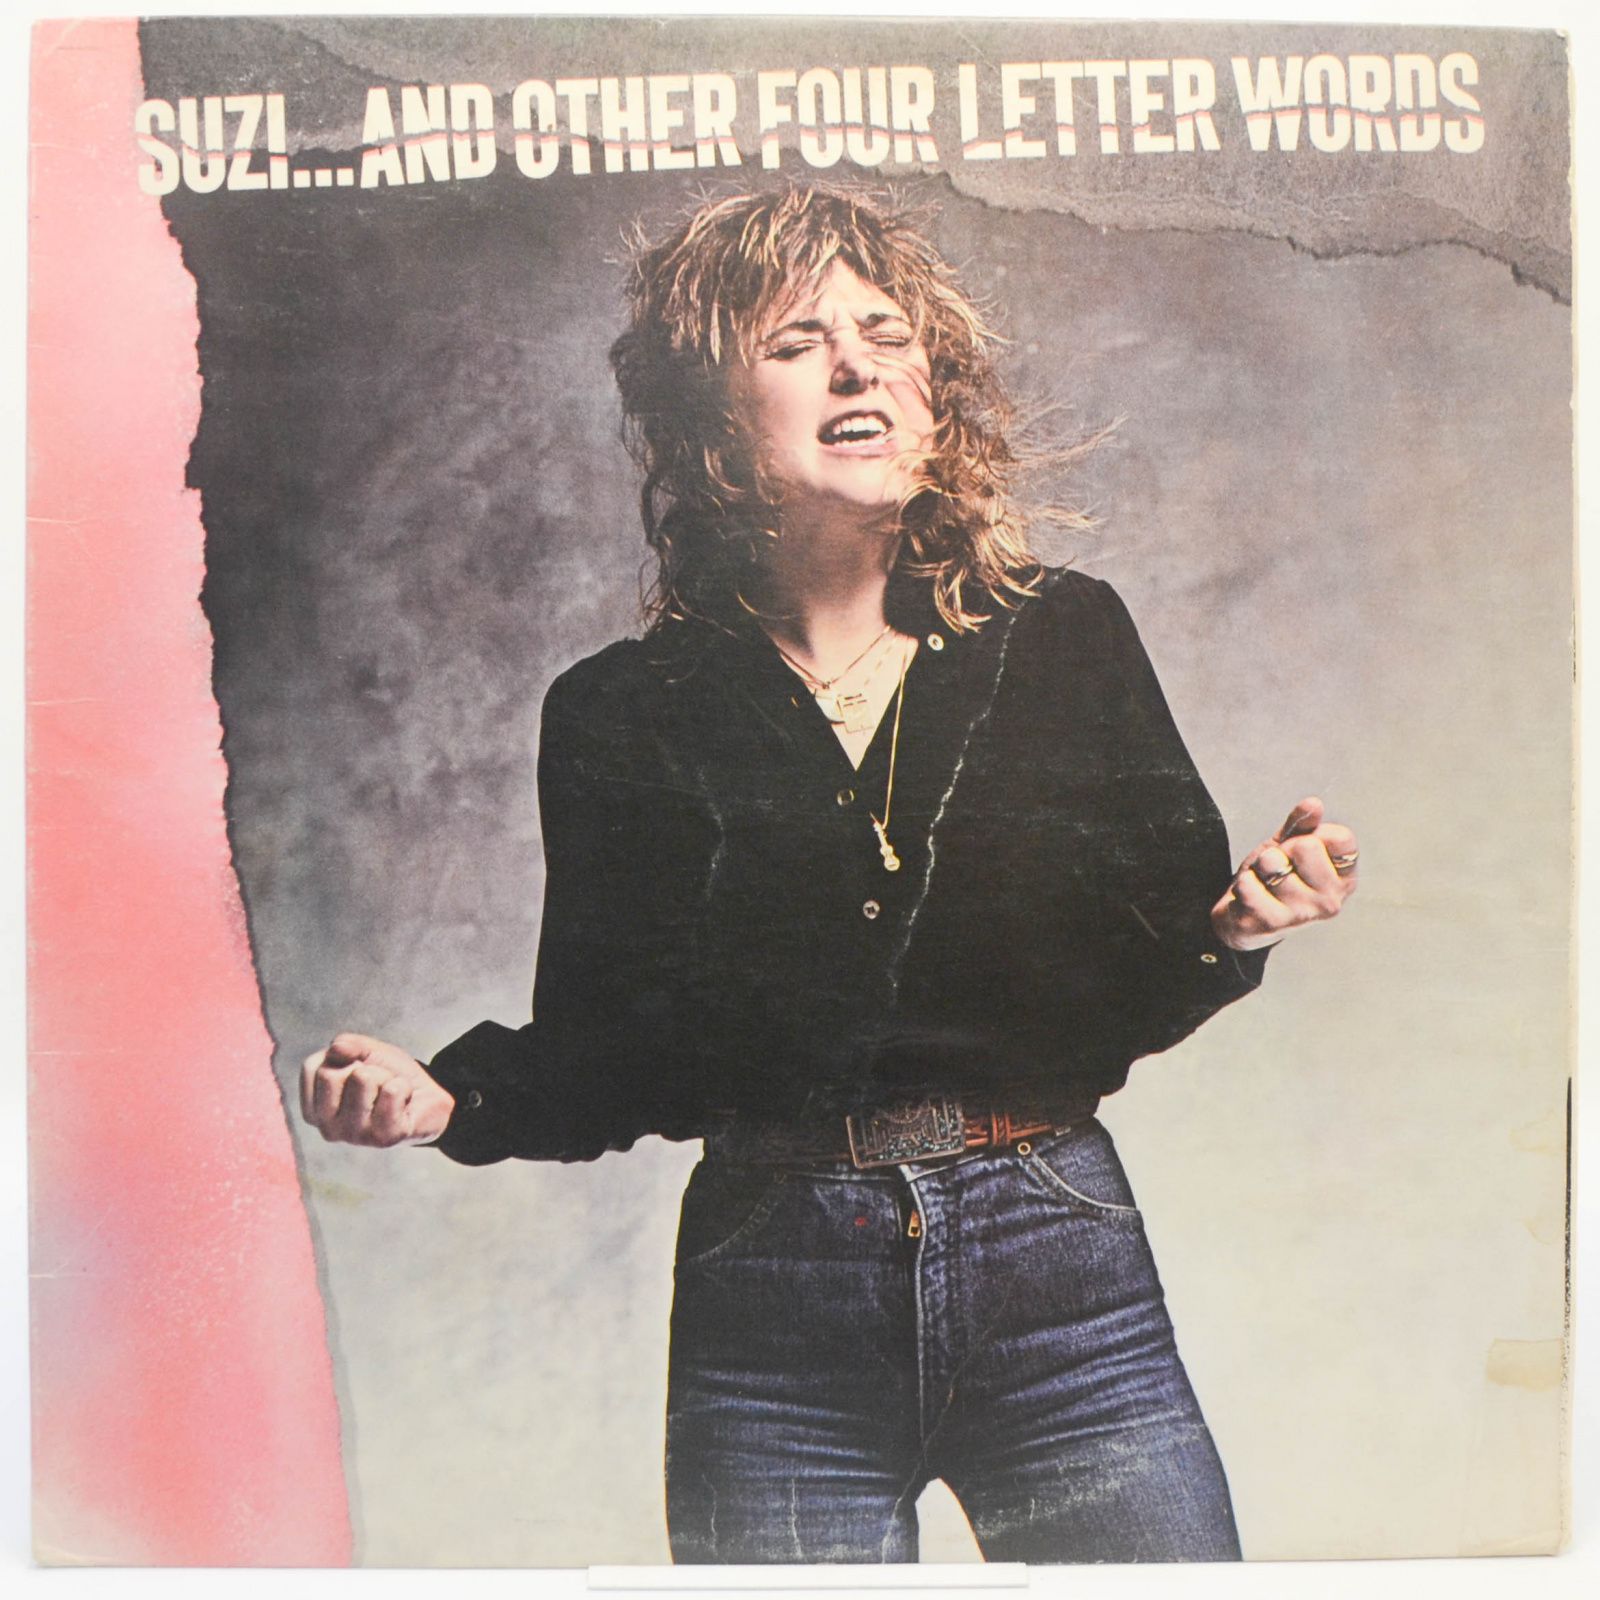 Suzi... And Other Four Letter Words, 1979